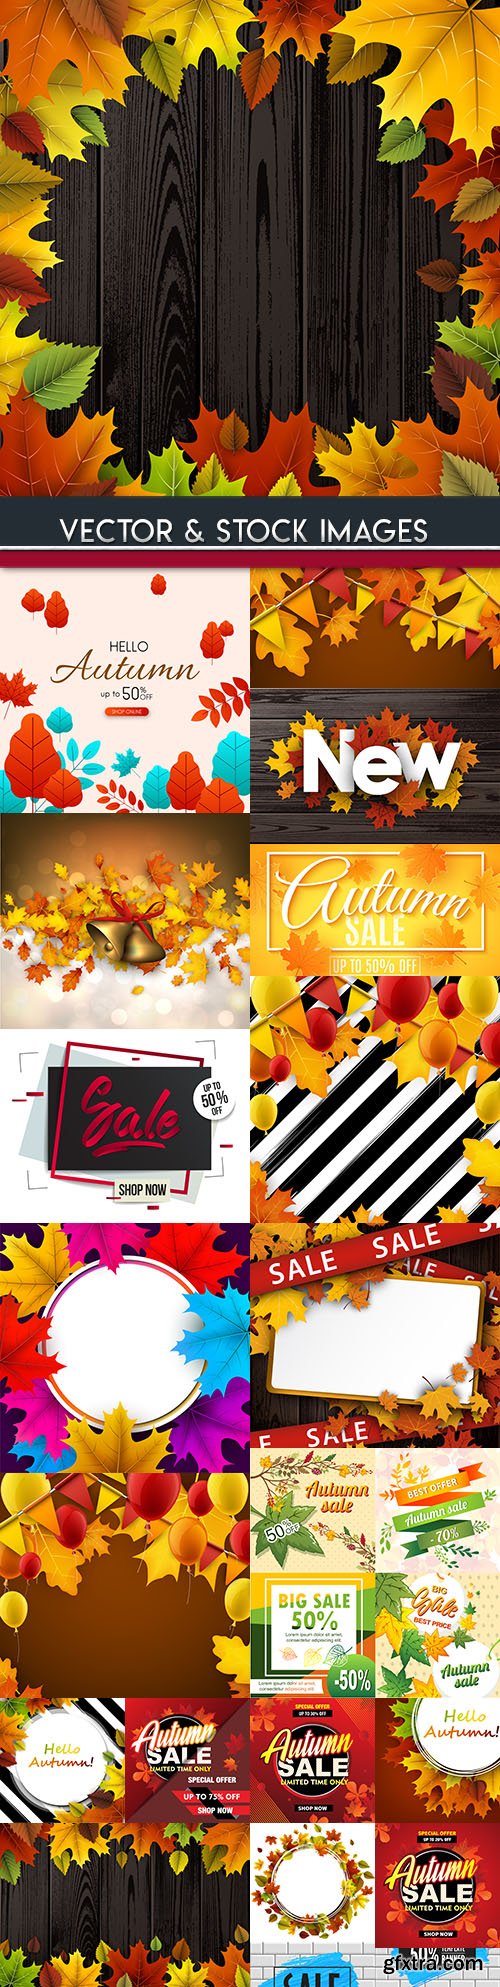 Autumn special sale and leaves wooden design background